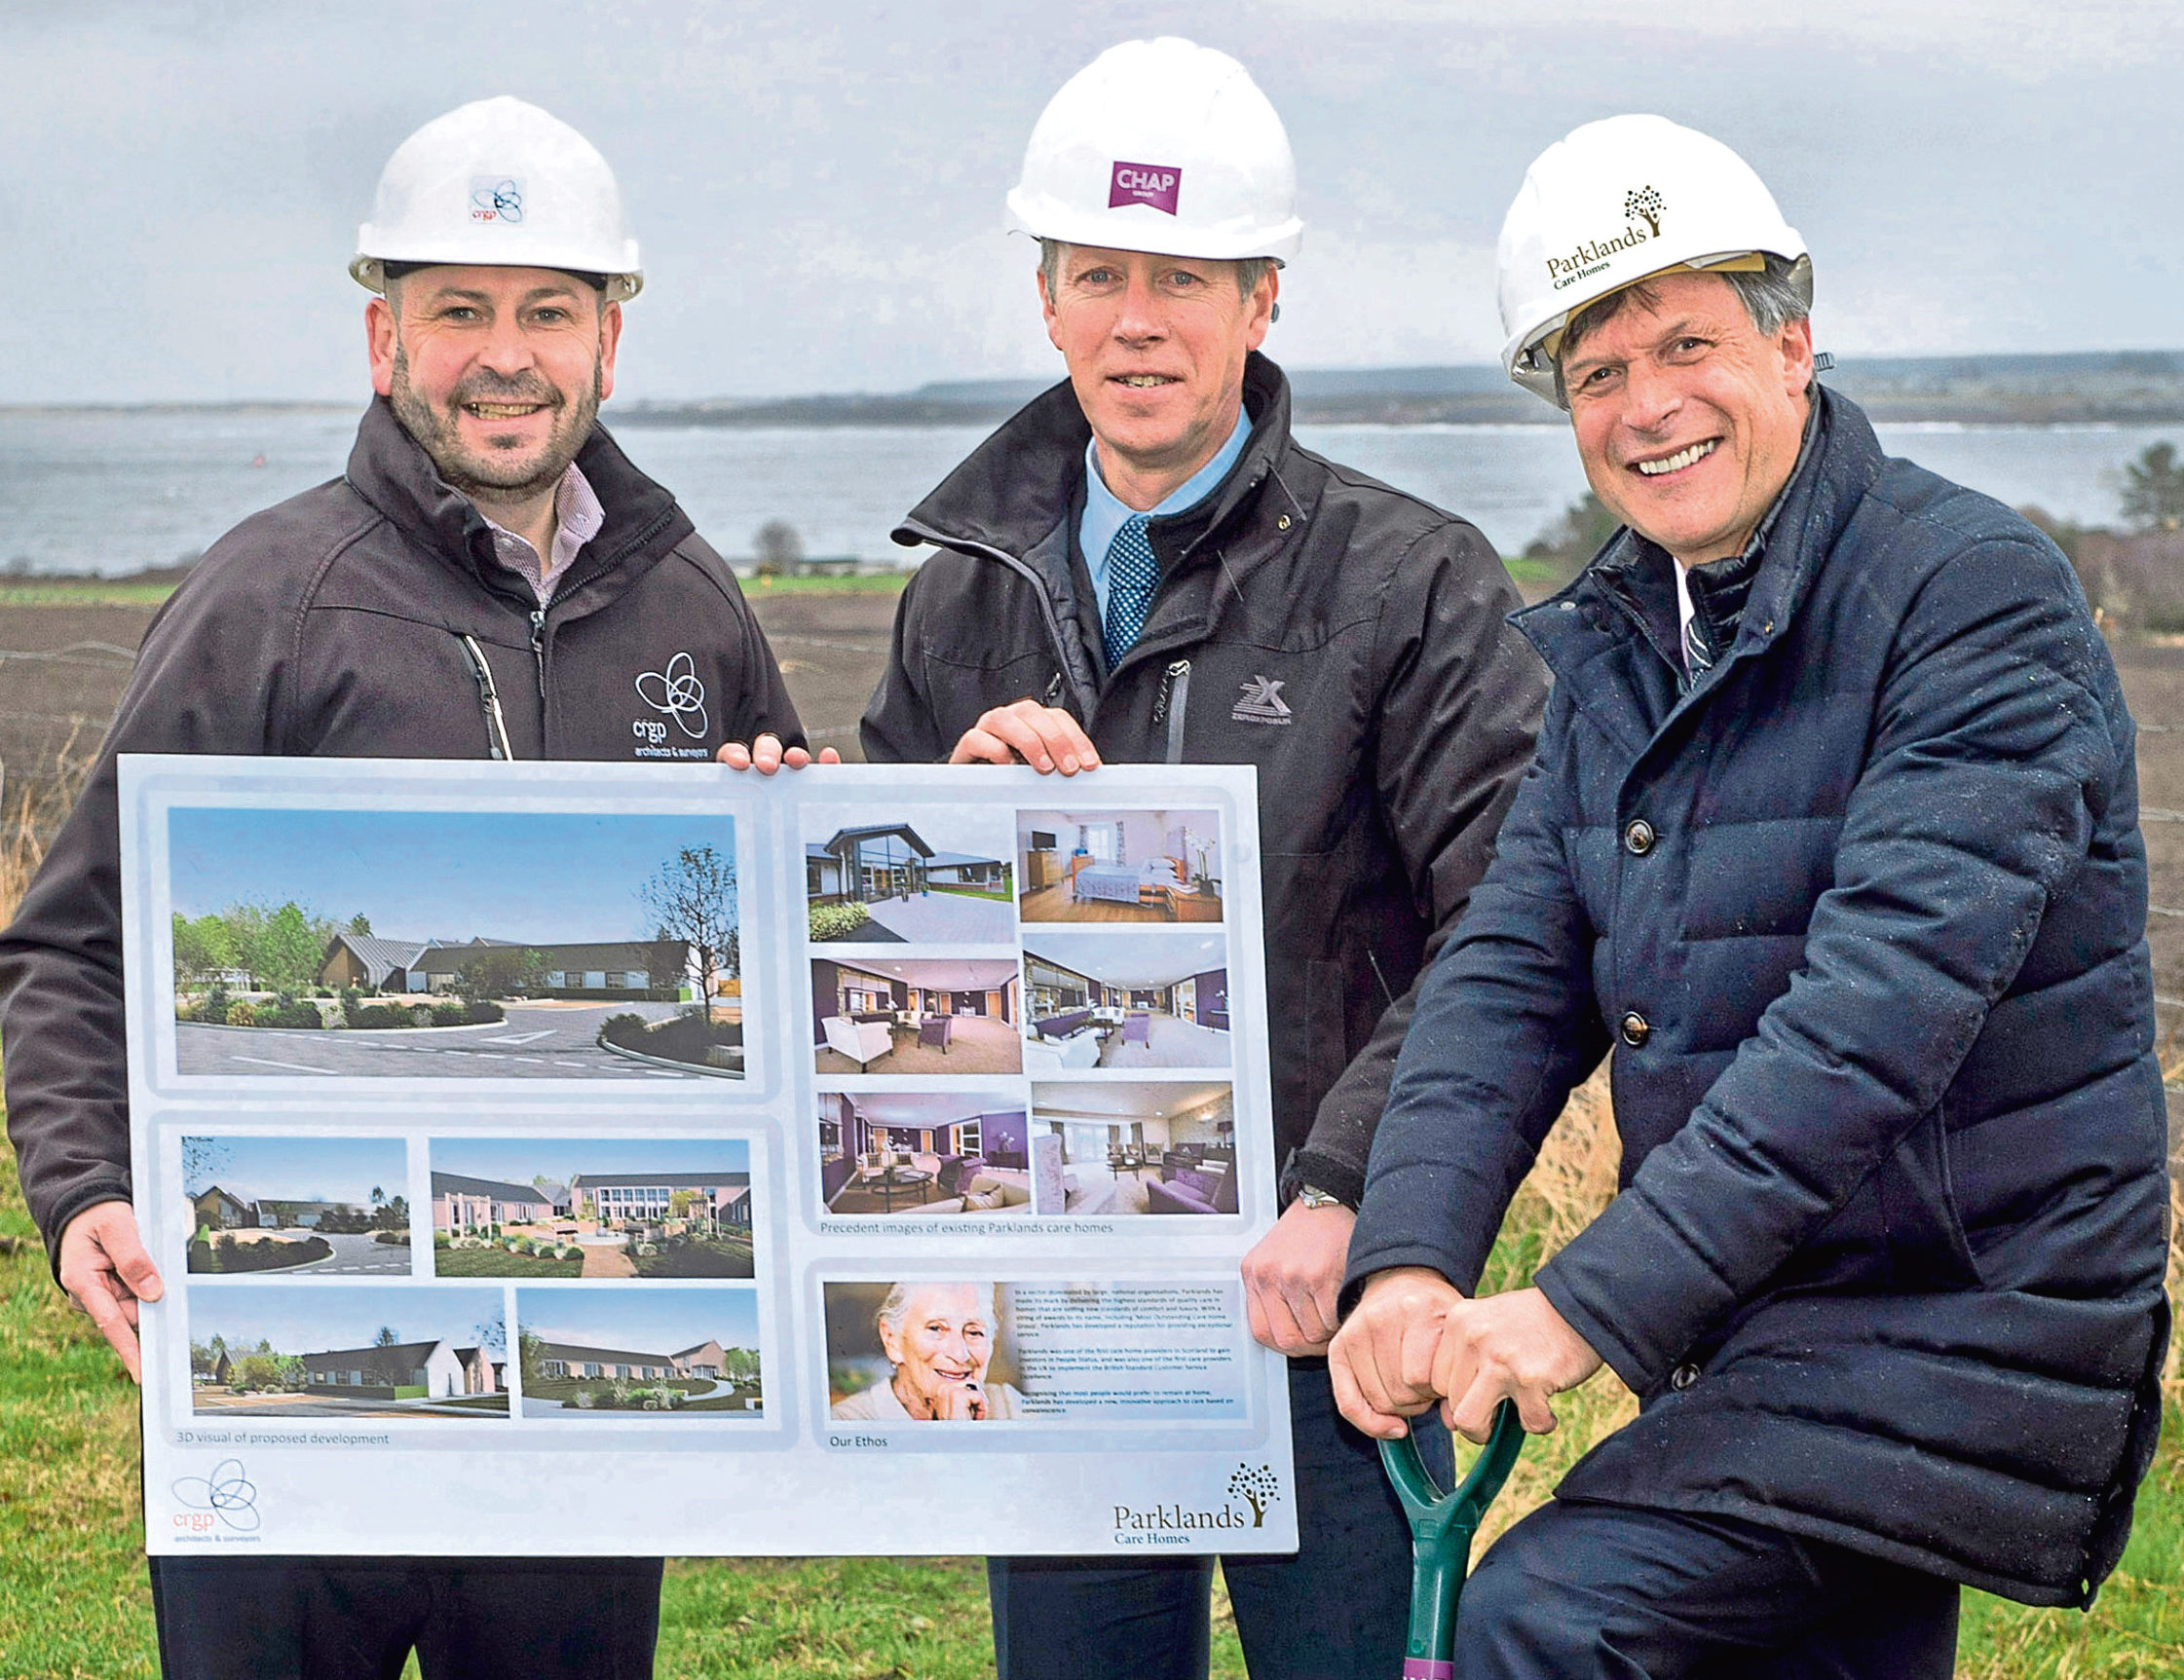 From left, CRPG Architects director McFadzean, CHAP managing director Douglas Thomson and Parklands Group managing director Ron Taylor.